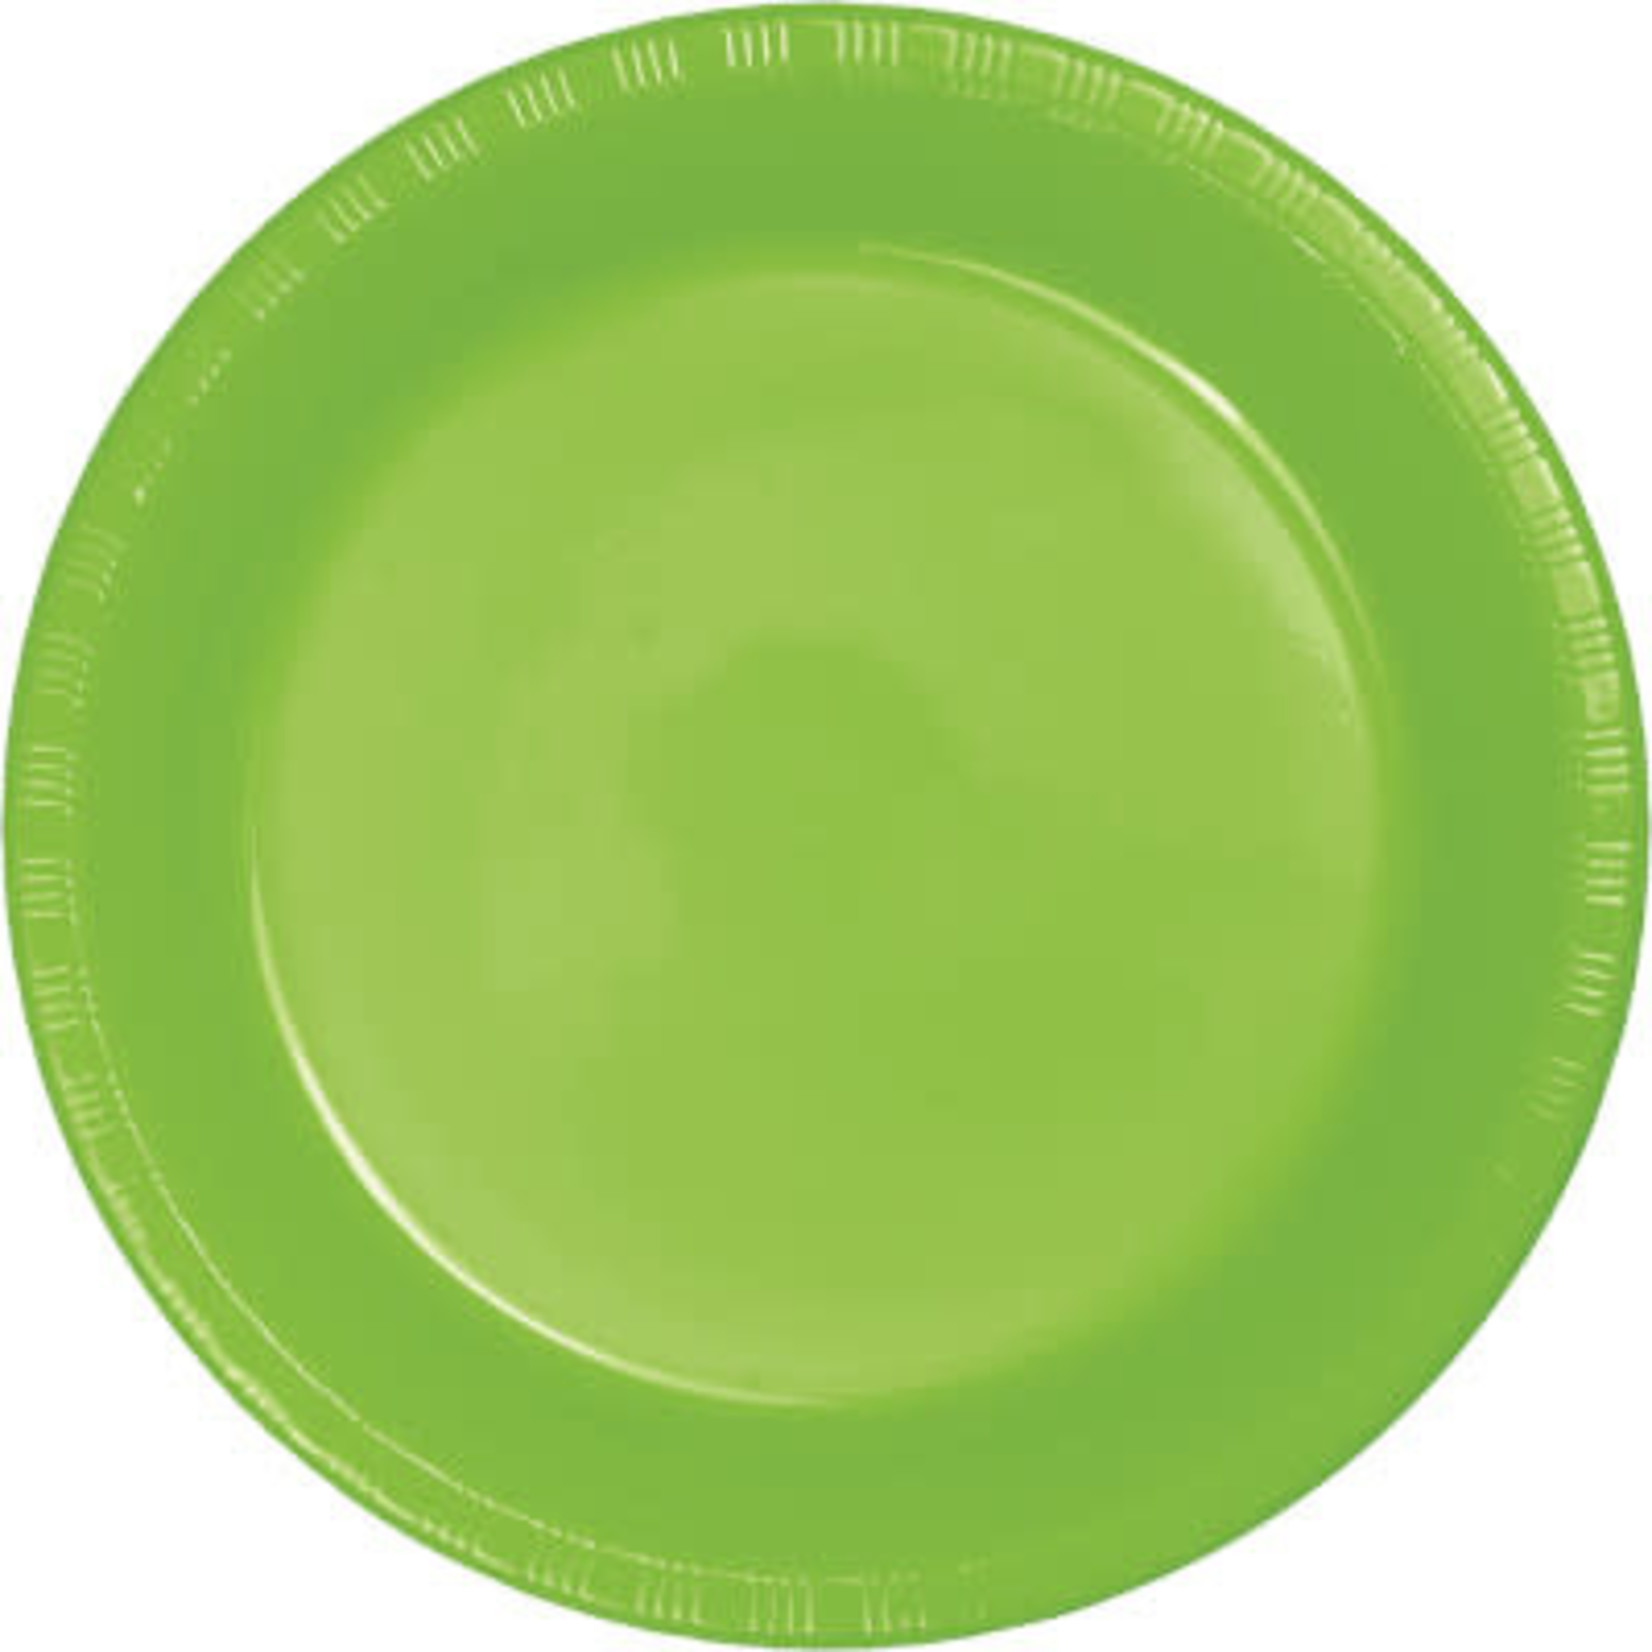 Touch of Color 7" Lime Green Plastic Plates - 20ct.